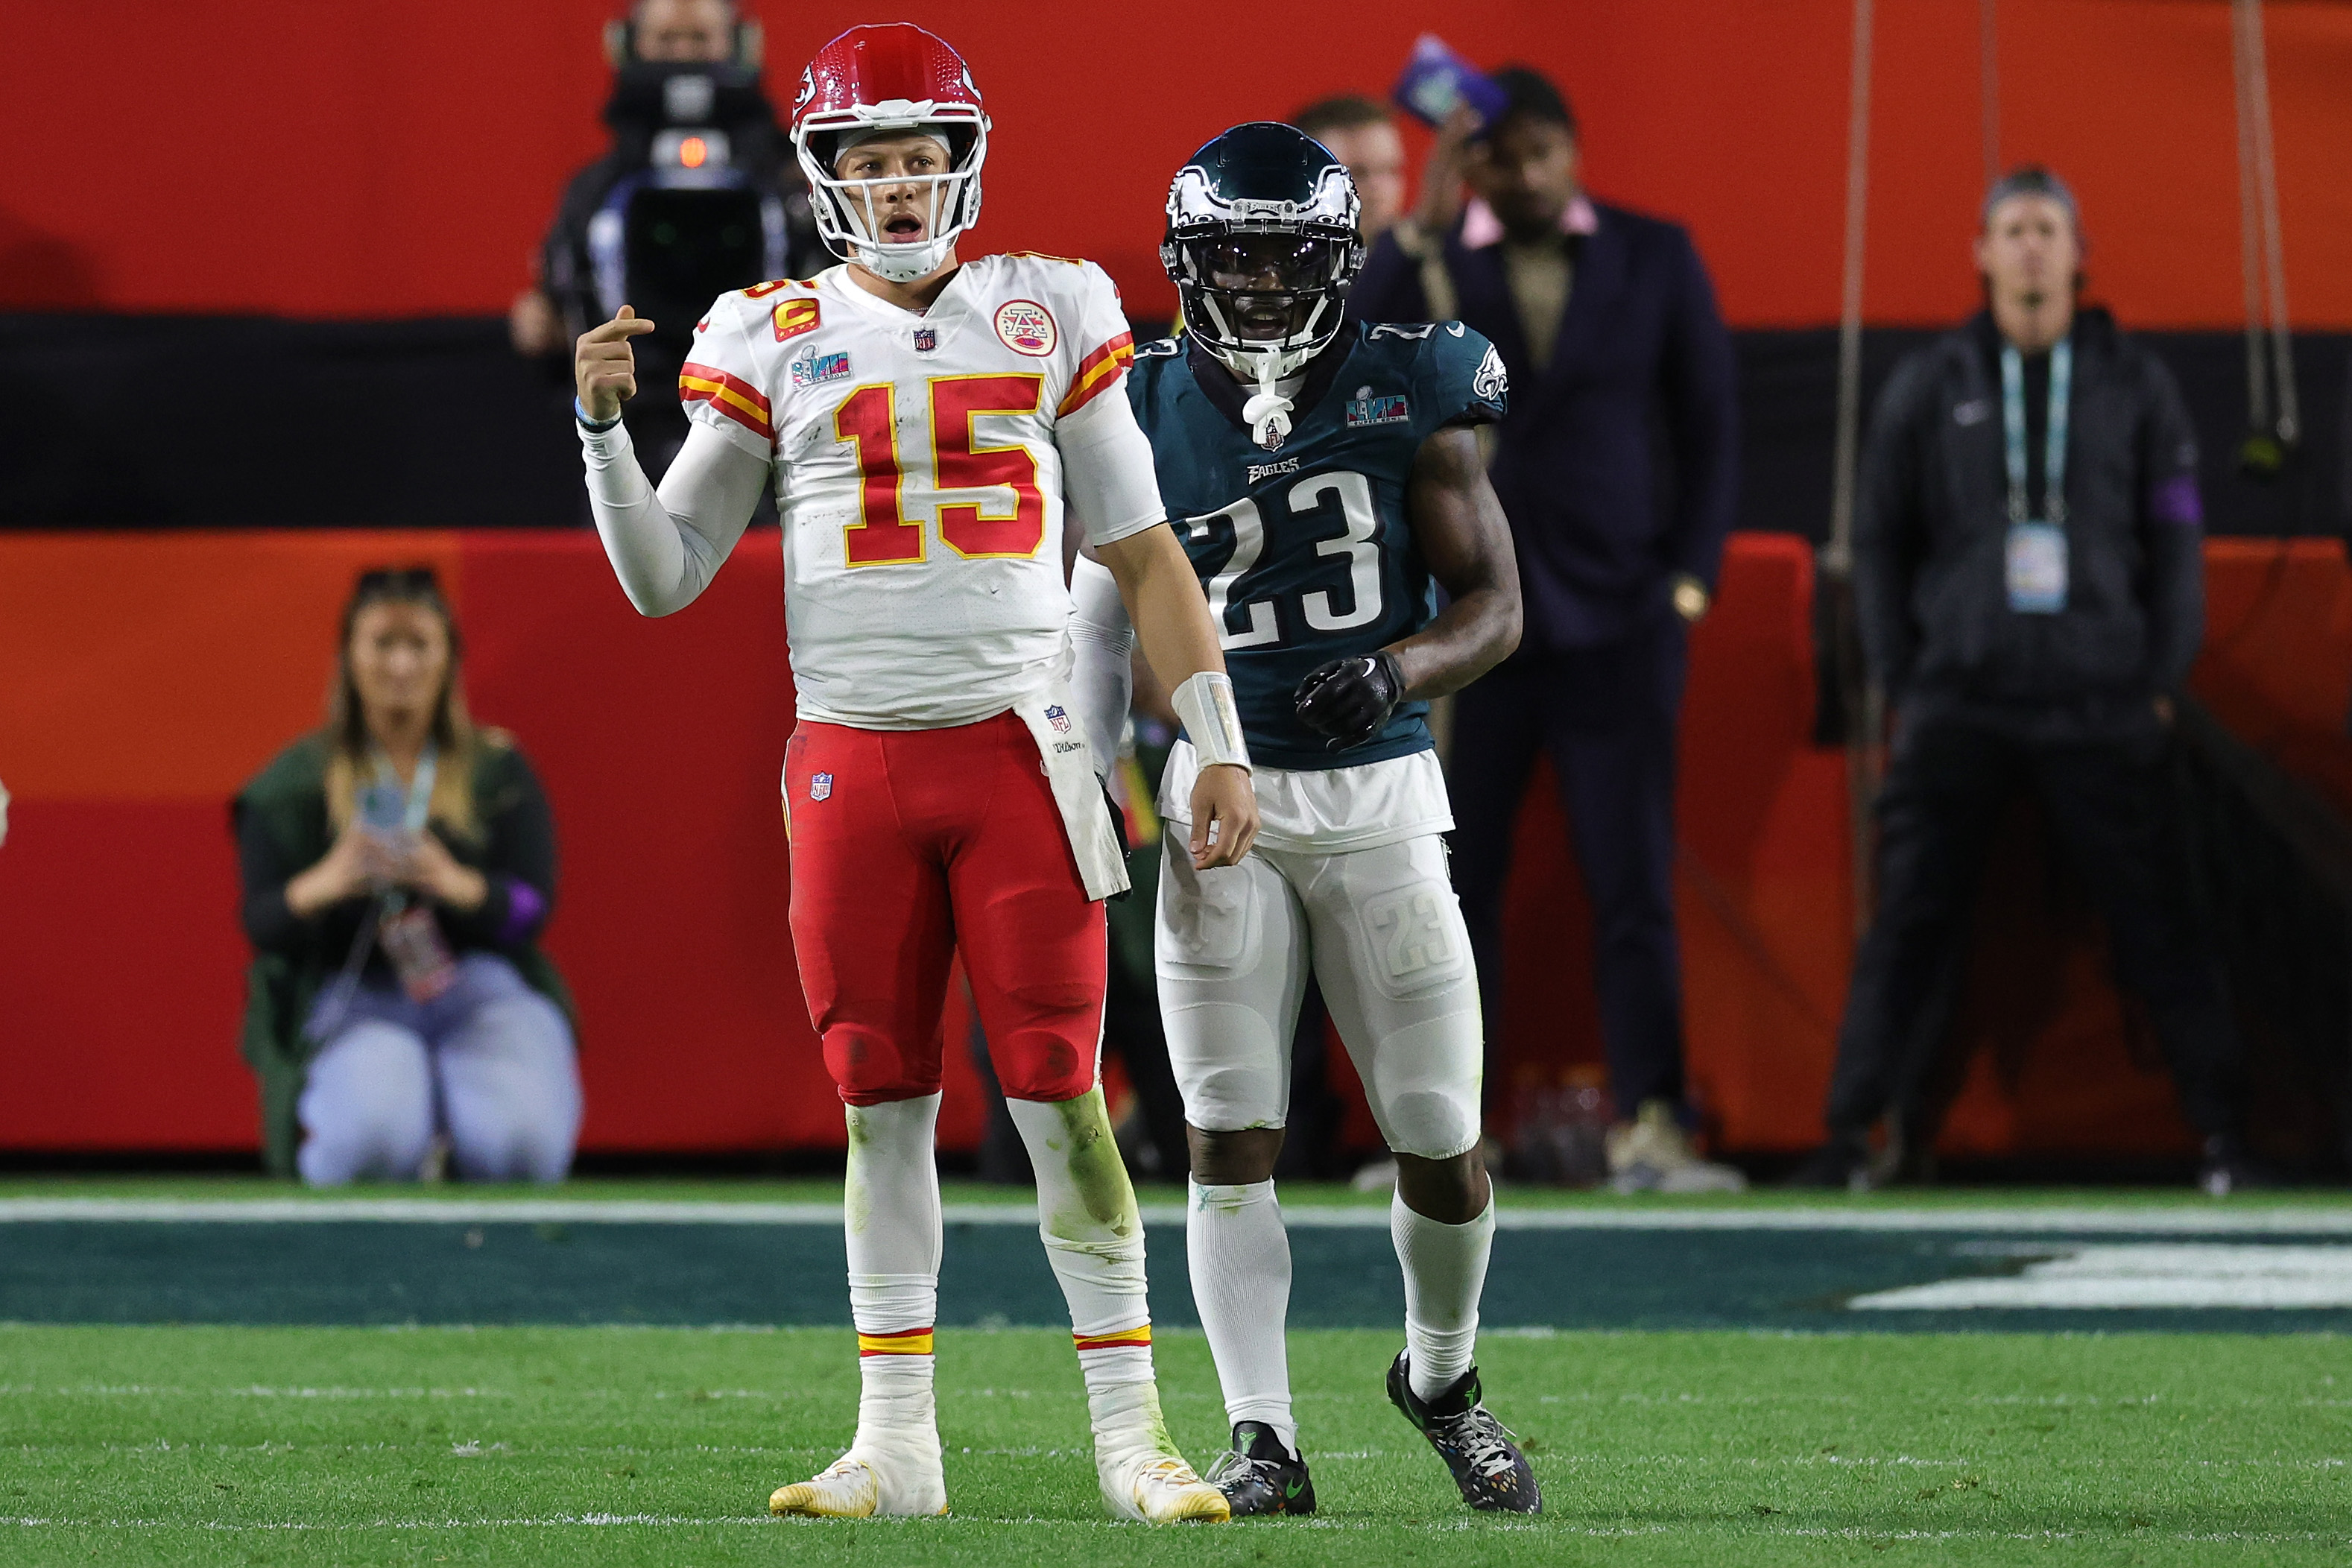 Patrick Mahomes #15 of the Kansas City Chiefs reacts after a play against C.J. Gardner-Johnson #23 of the Philadelphia Eagles during the fourth quarter in Super Bowl LVII at State Farm Stadium on February 12, 2023 in Glendale, Arizona.